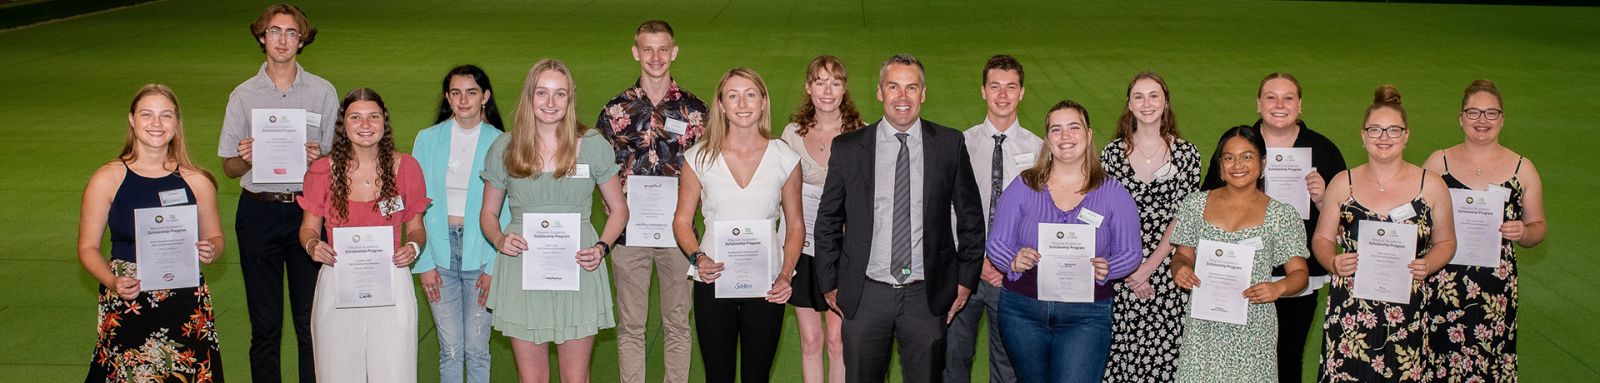 Port Stephens students share in $40,000 in Mayoral scholarships | Port ...